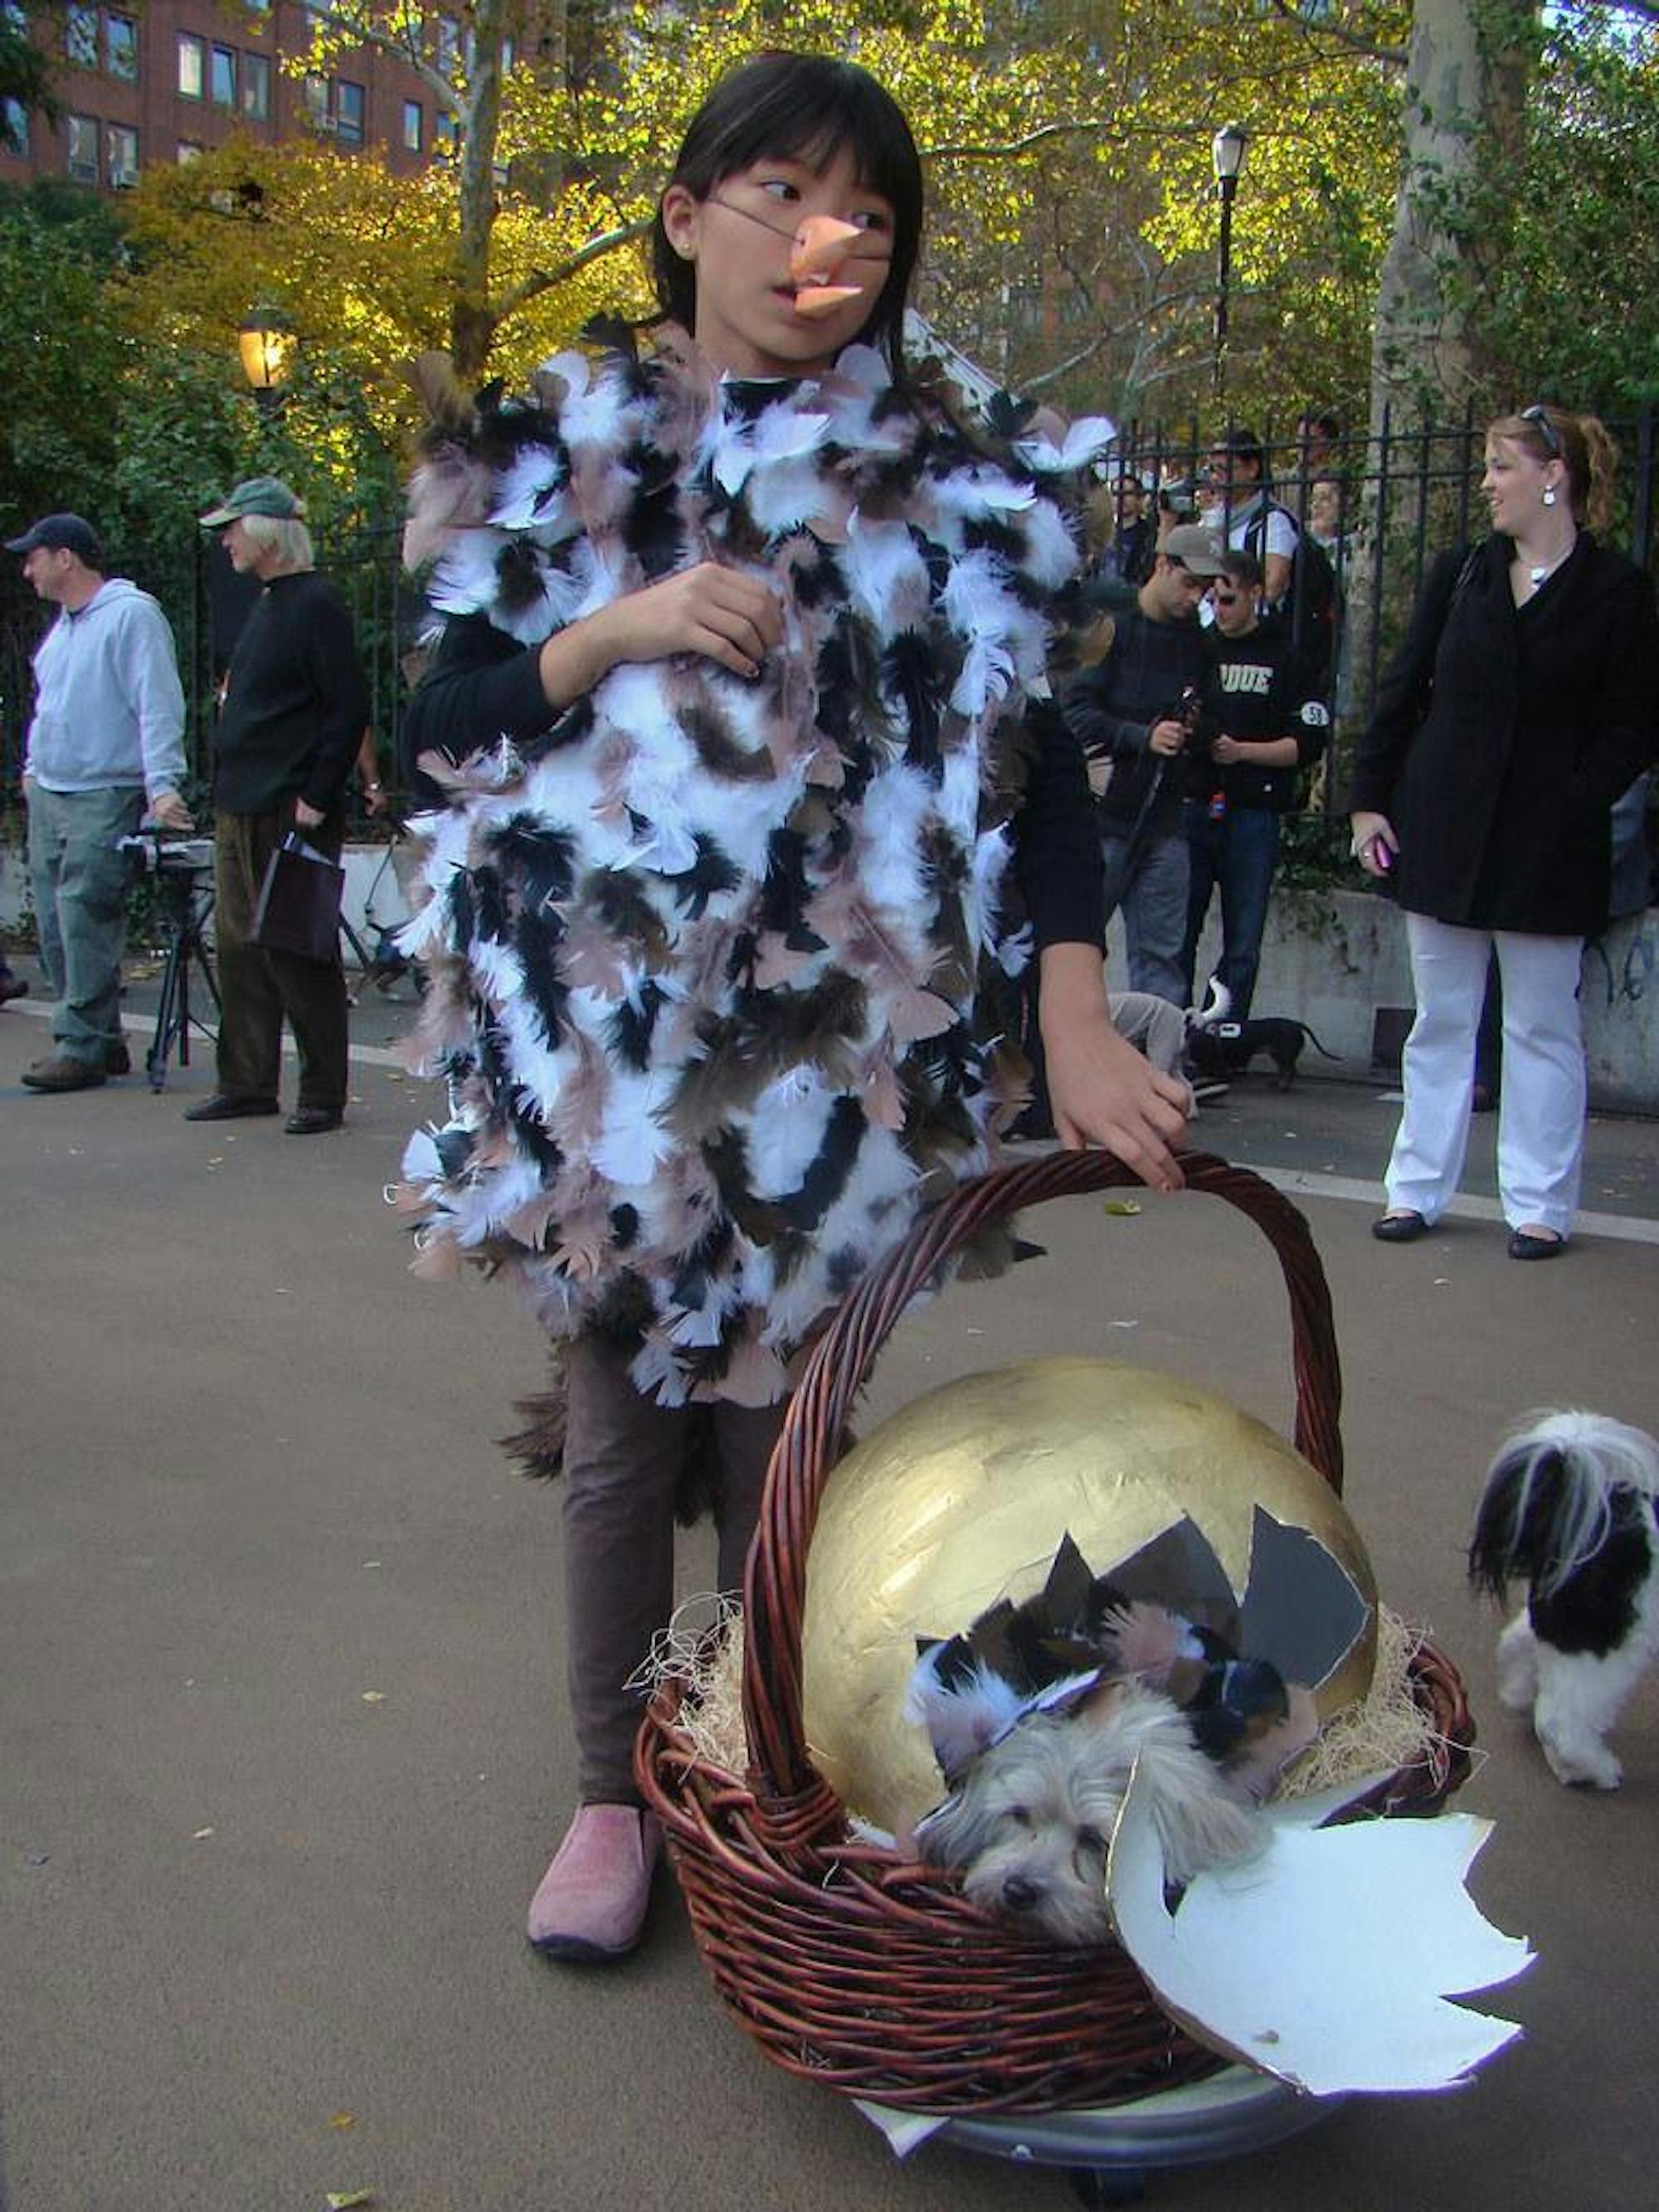 A girl dresses as a feathery bird and holds a basket that contains an egg.